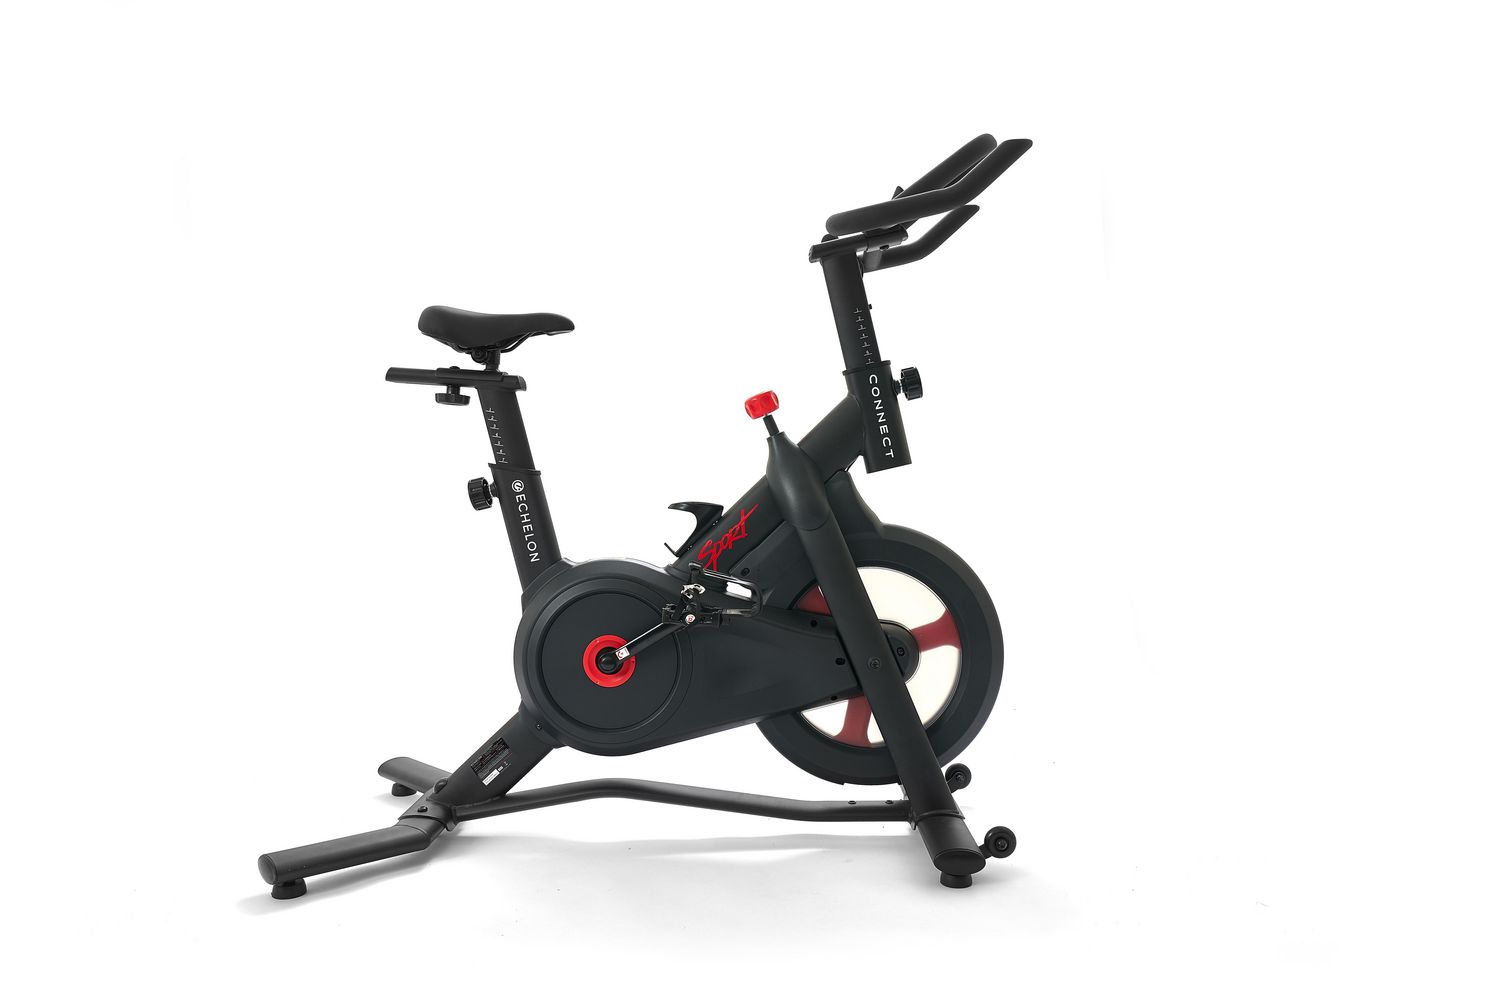 connected exercise bike